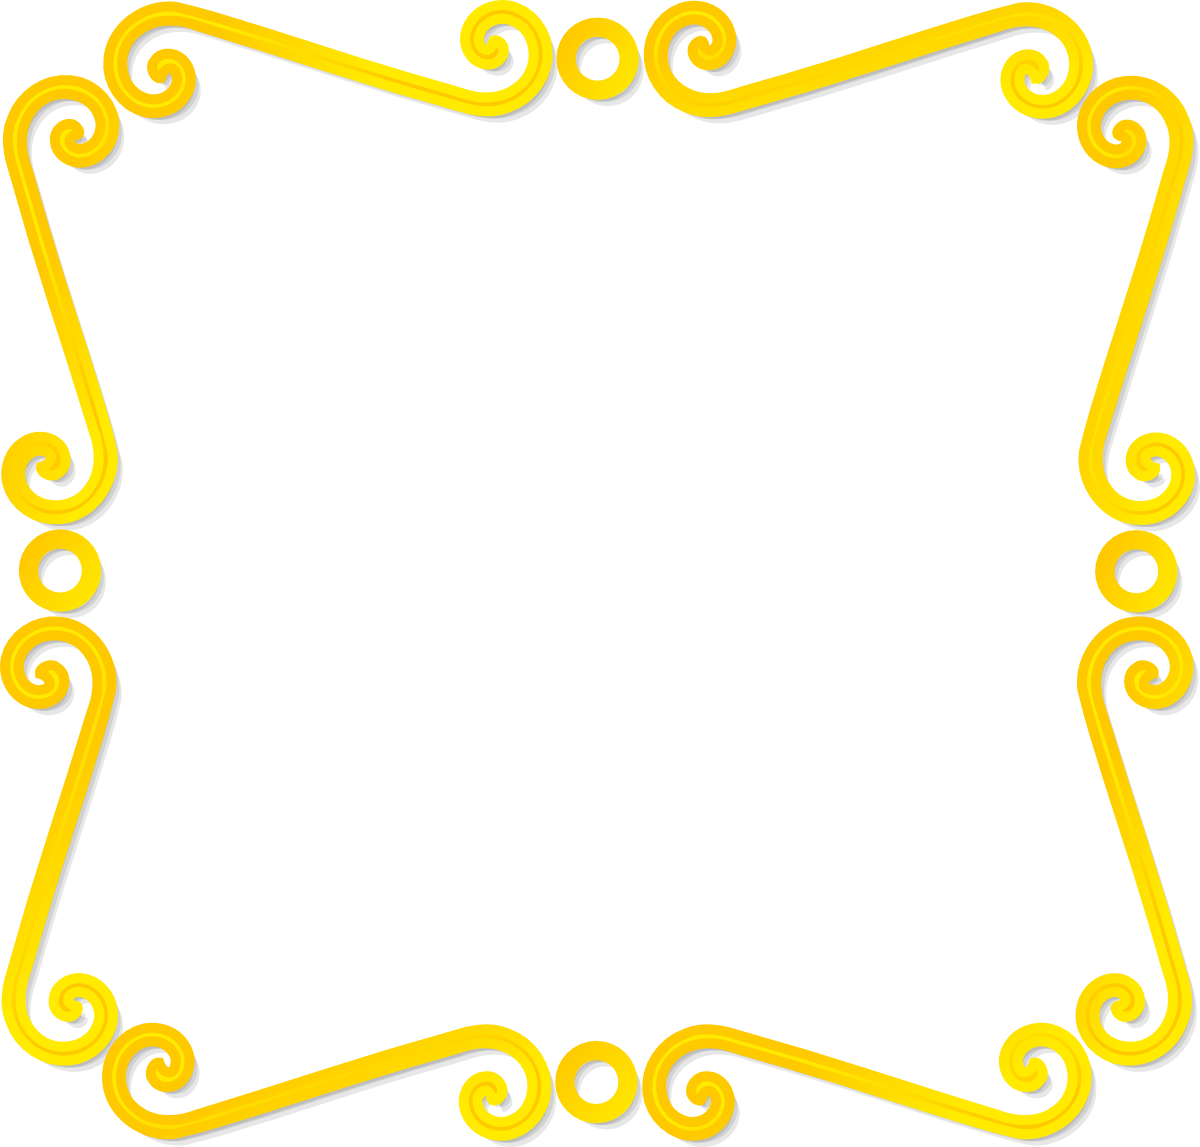 Gold Decorative Border Vector: AI and EPS Downloads 